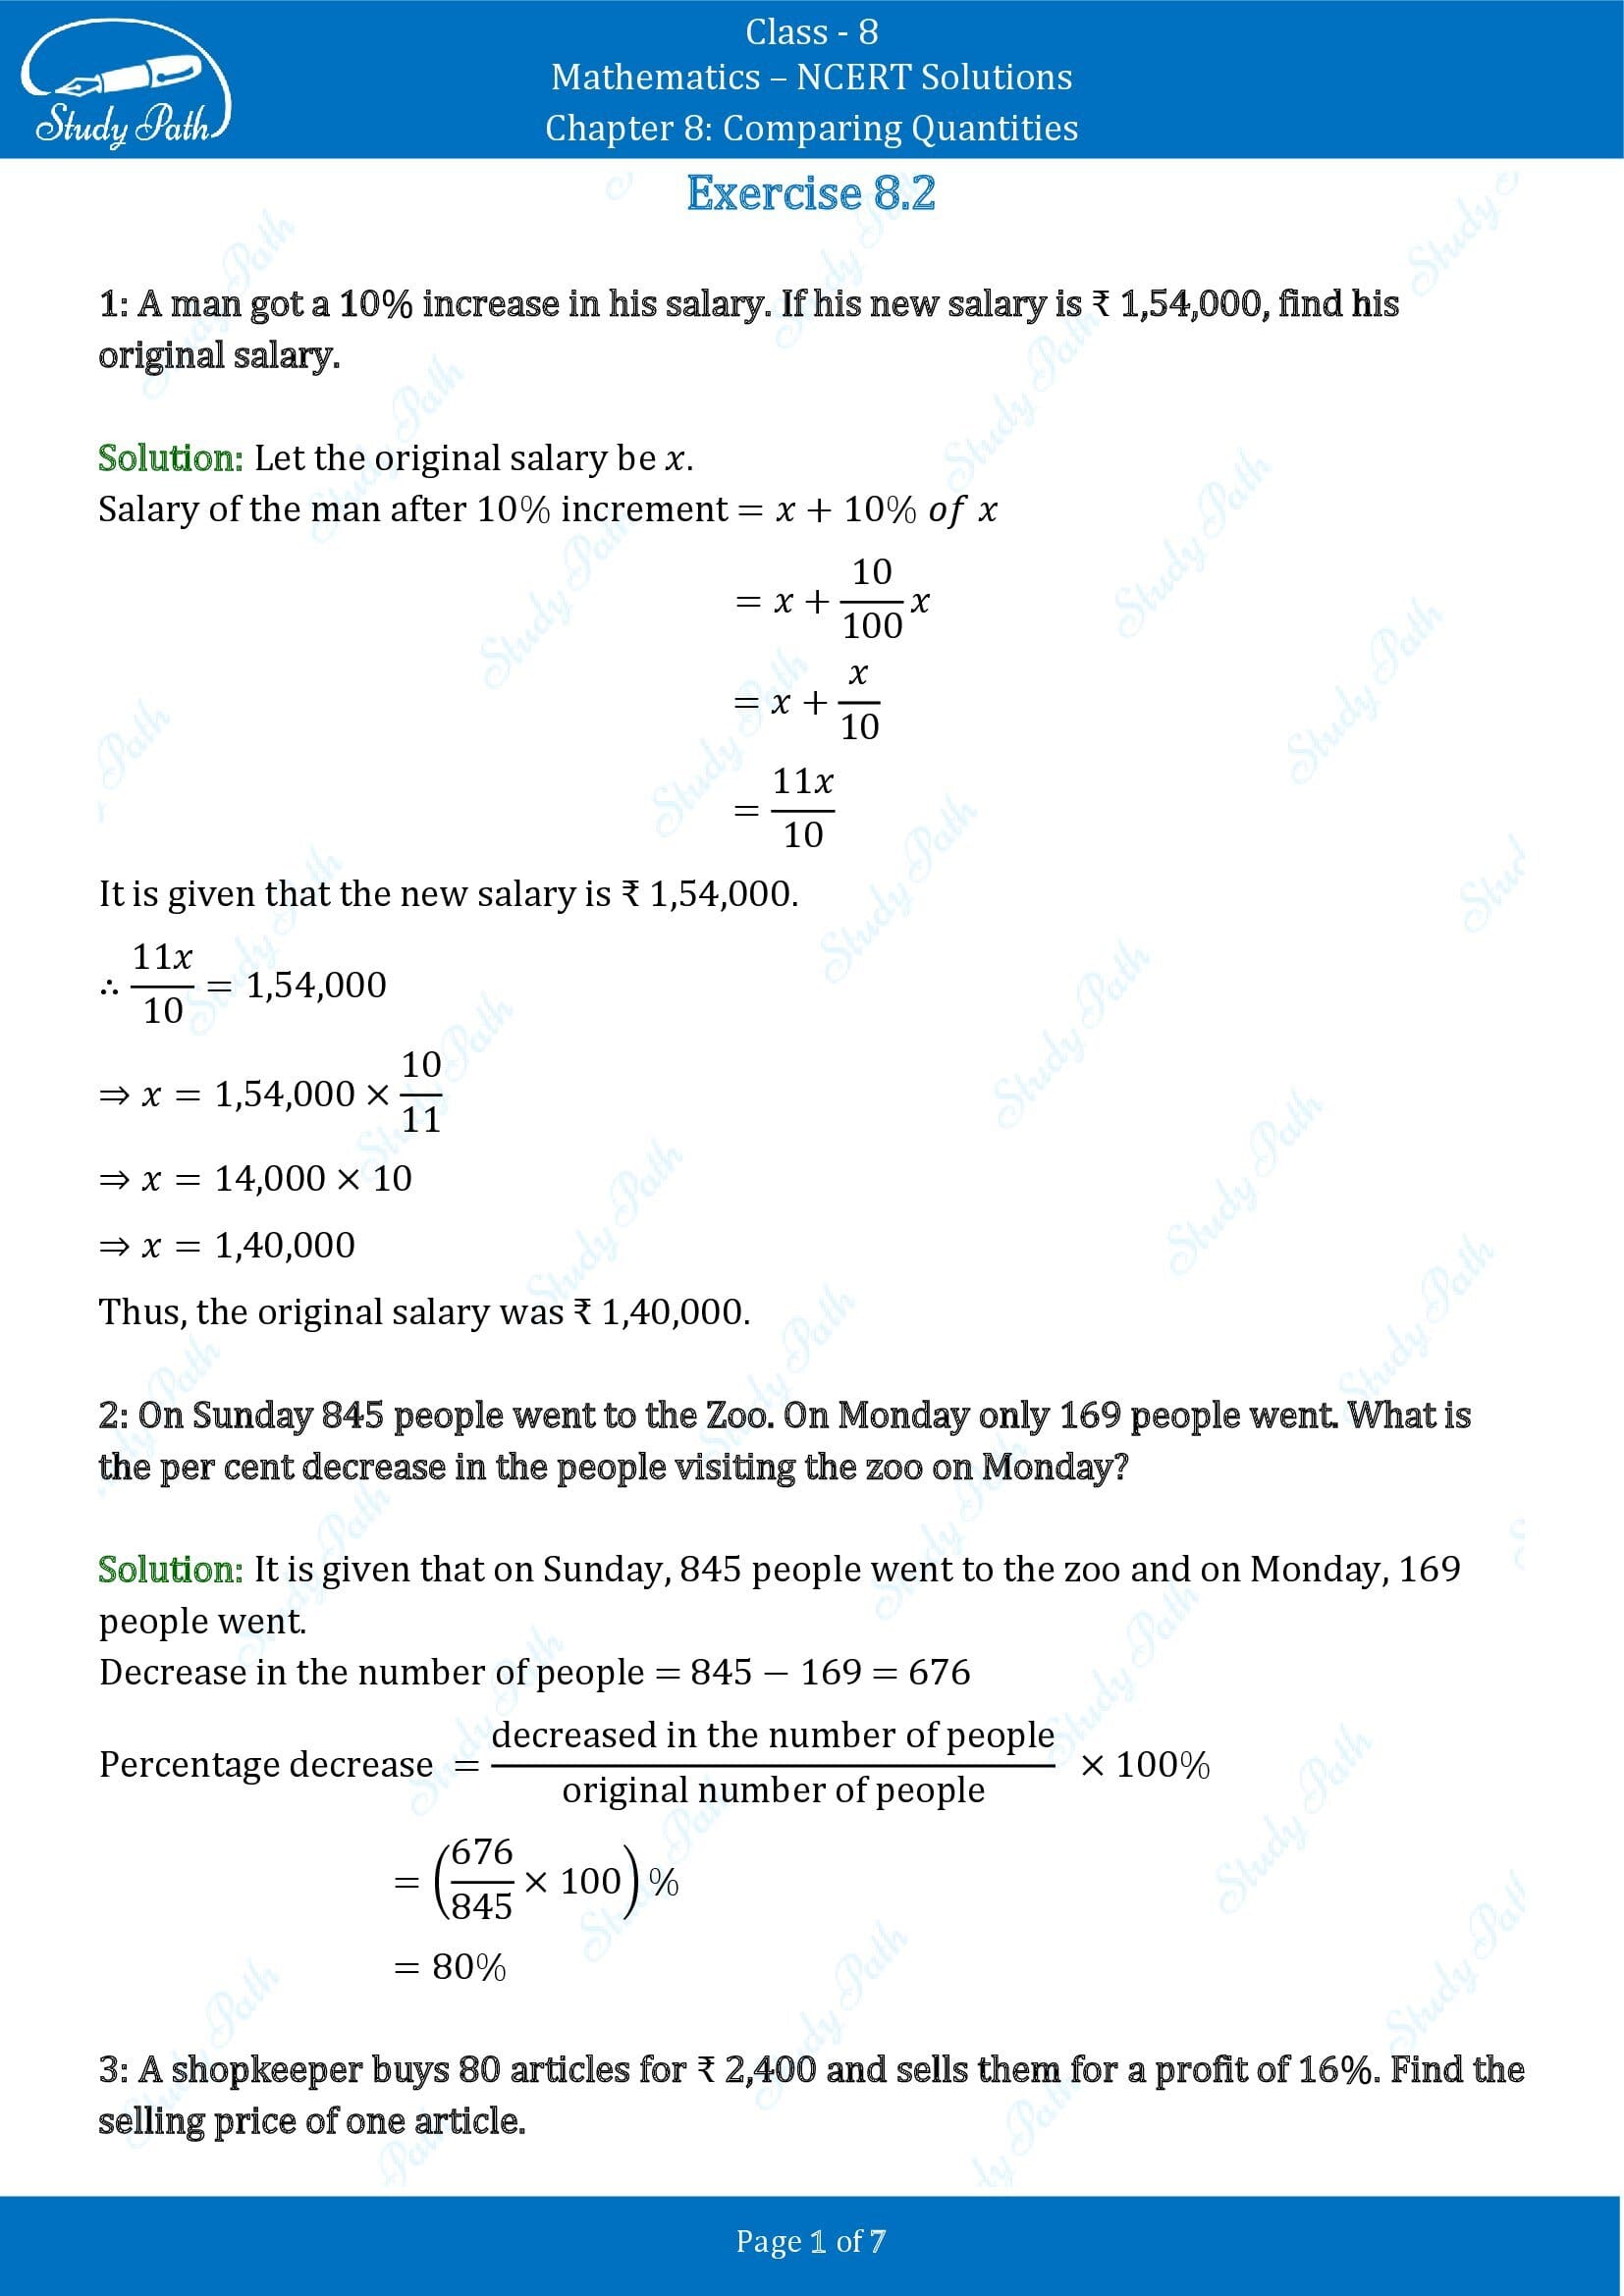 NCERT Solutions for Class 8 Maths Chapter 8 Comparing Quantities Exercise 8.2 00001